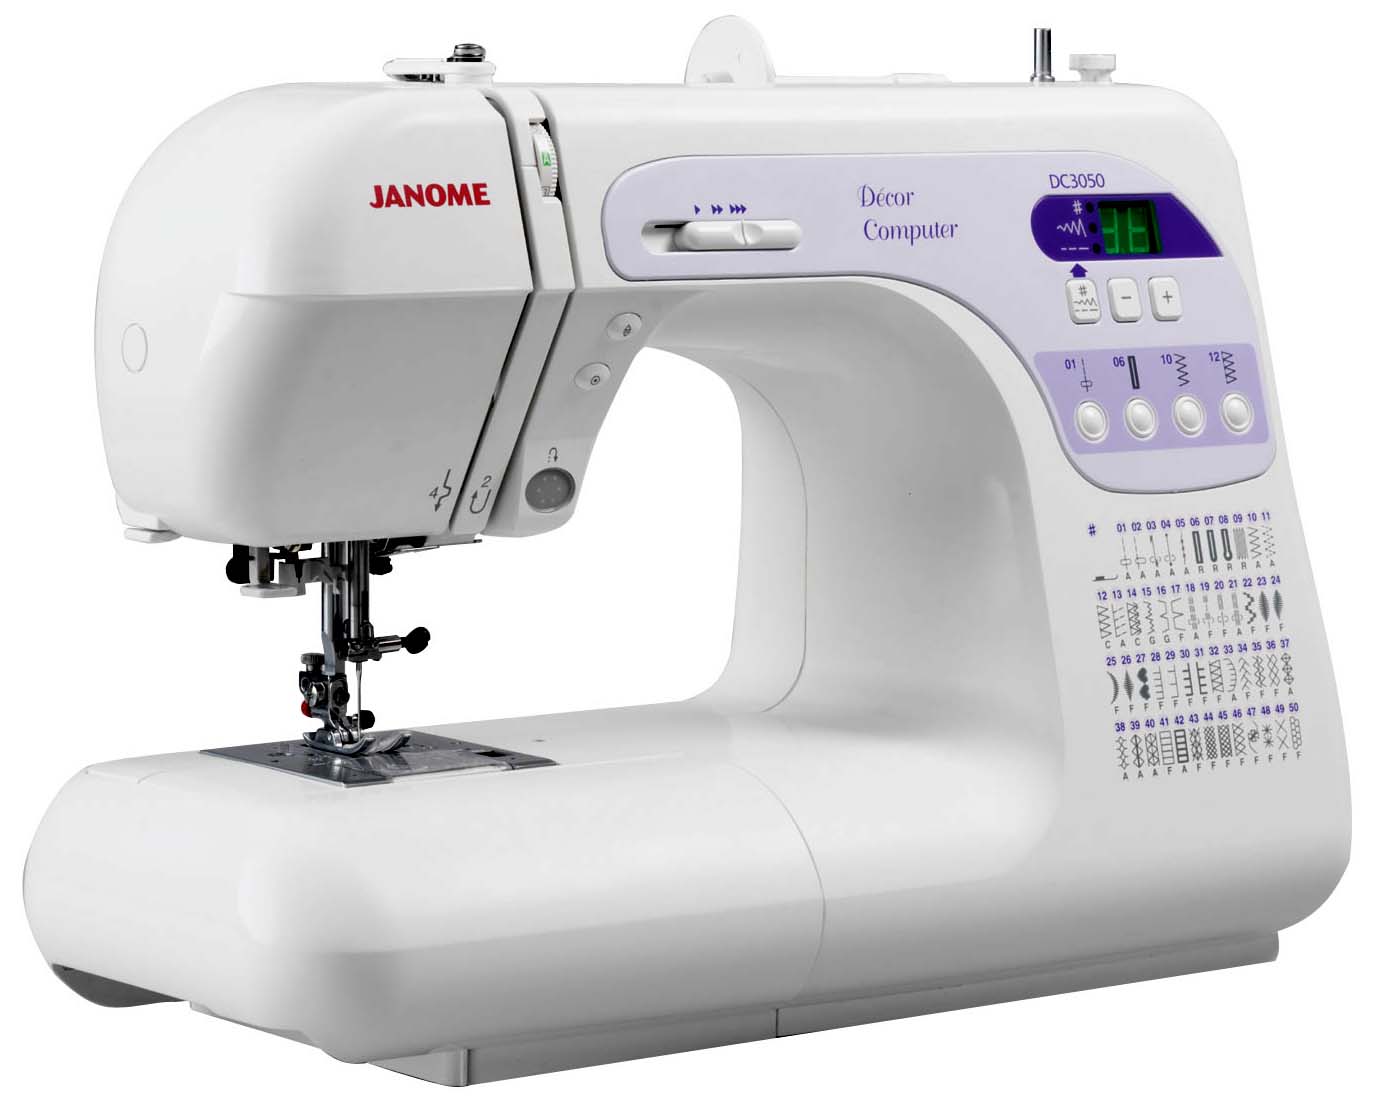 Janome Sewing Machines Instruction Manual Dc 2018